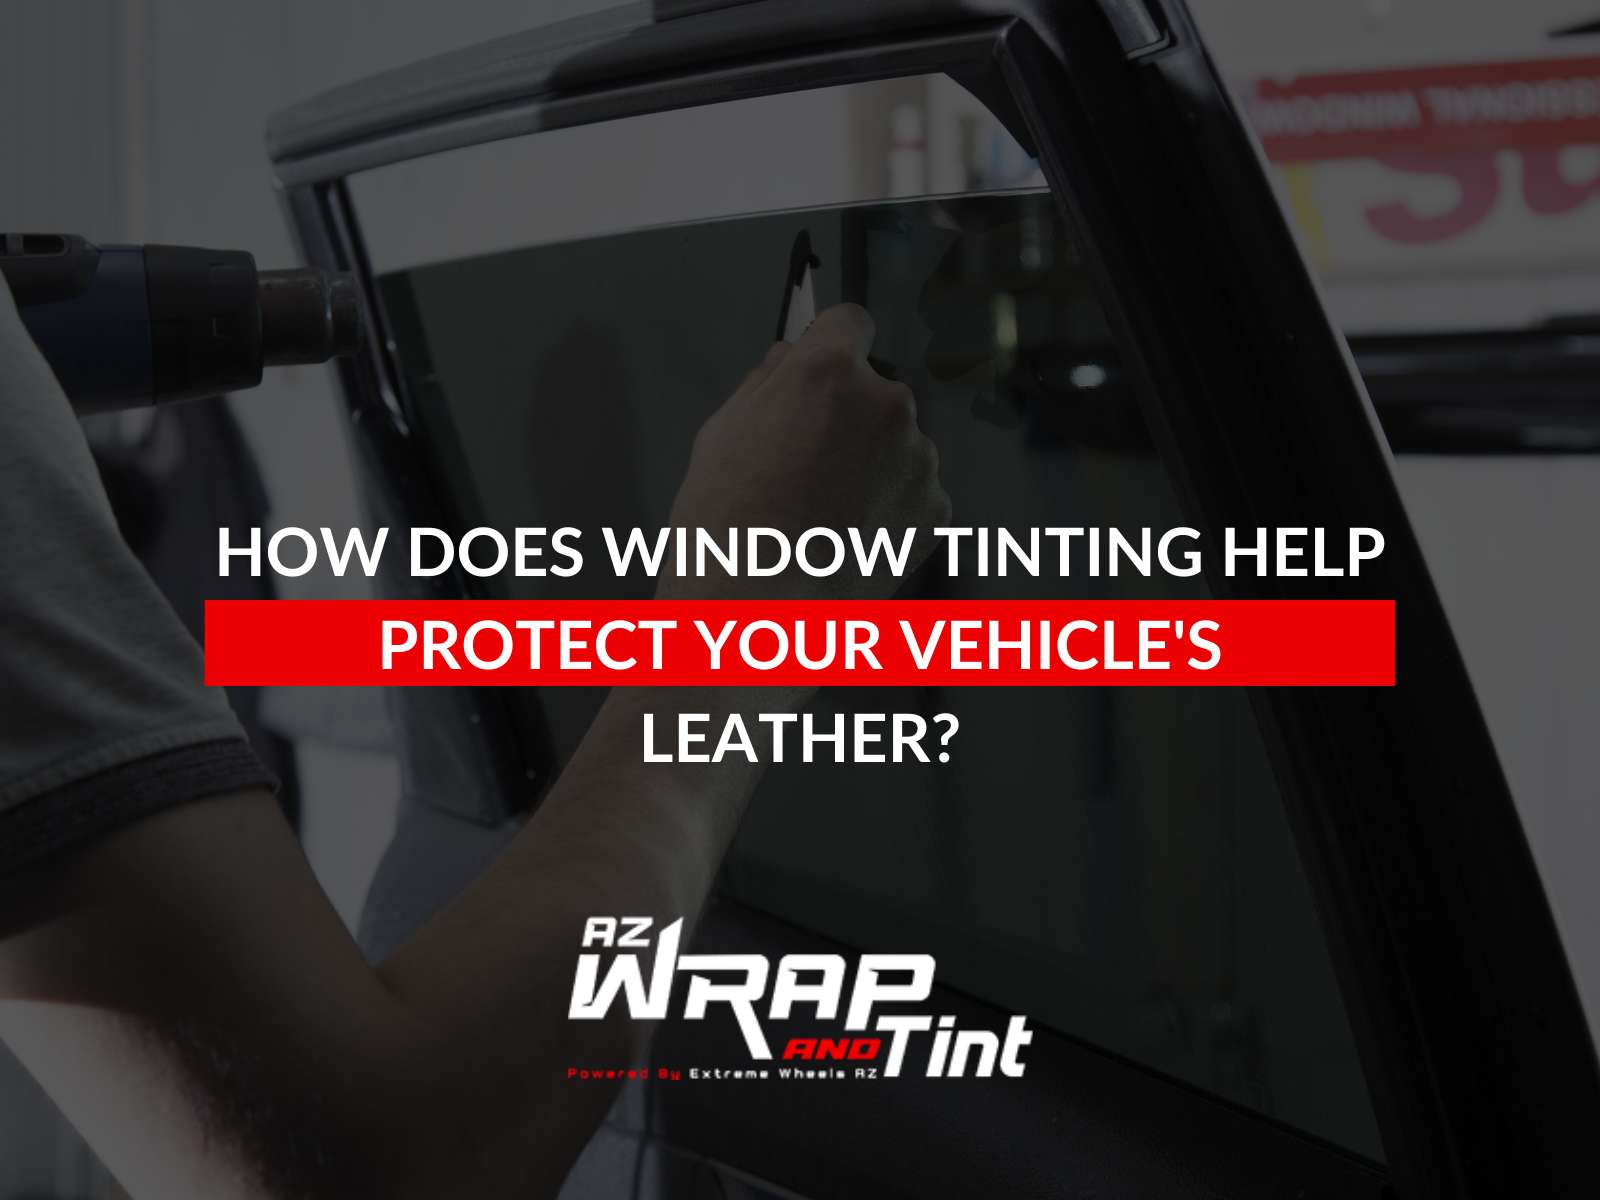 How Does Window Tinting Help Protect Your Vehicle's Leather